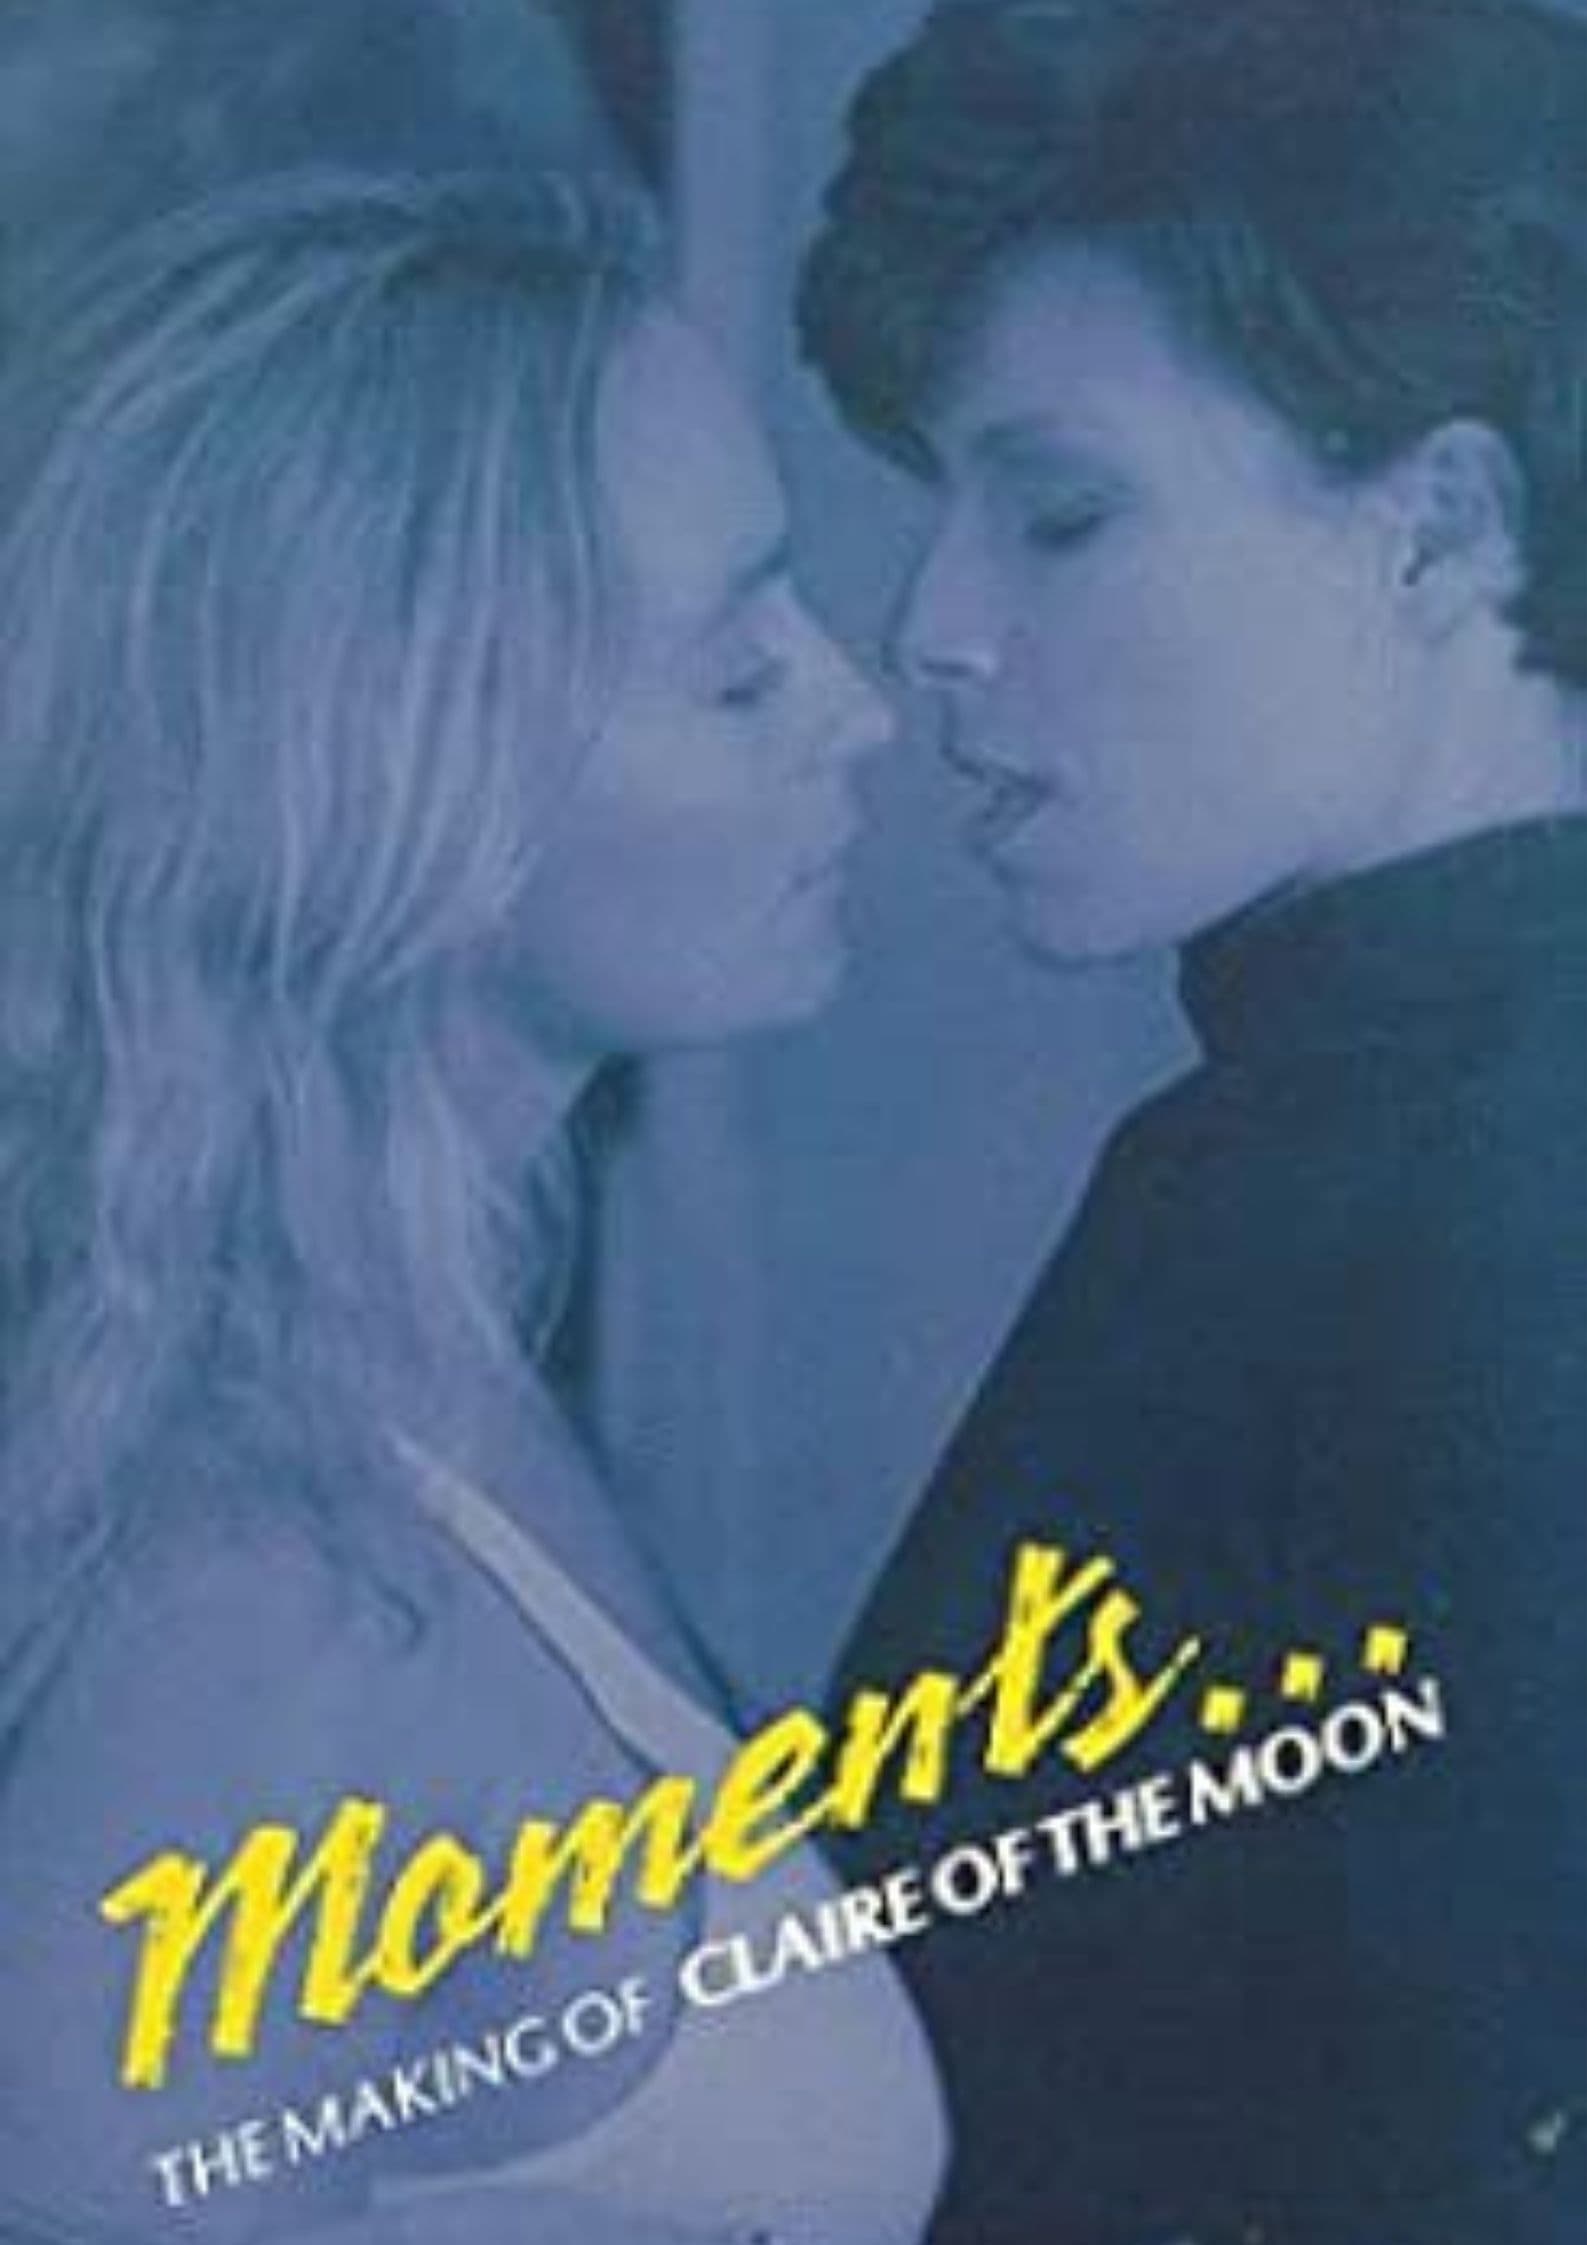 Moments: The Making Of Claire and the Moon